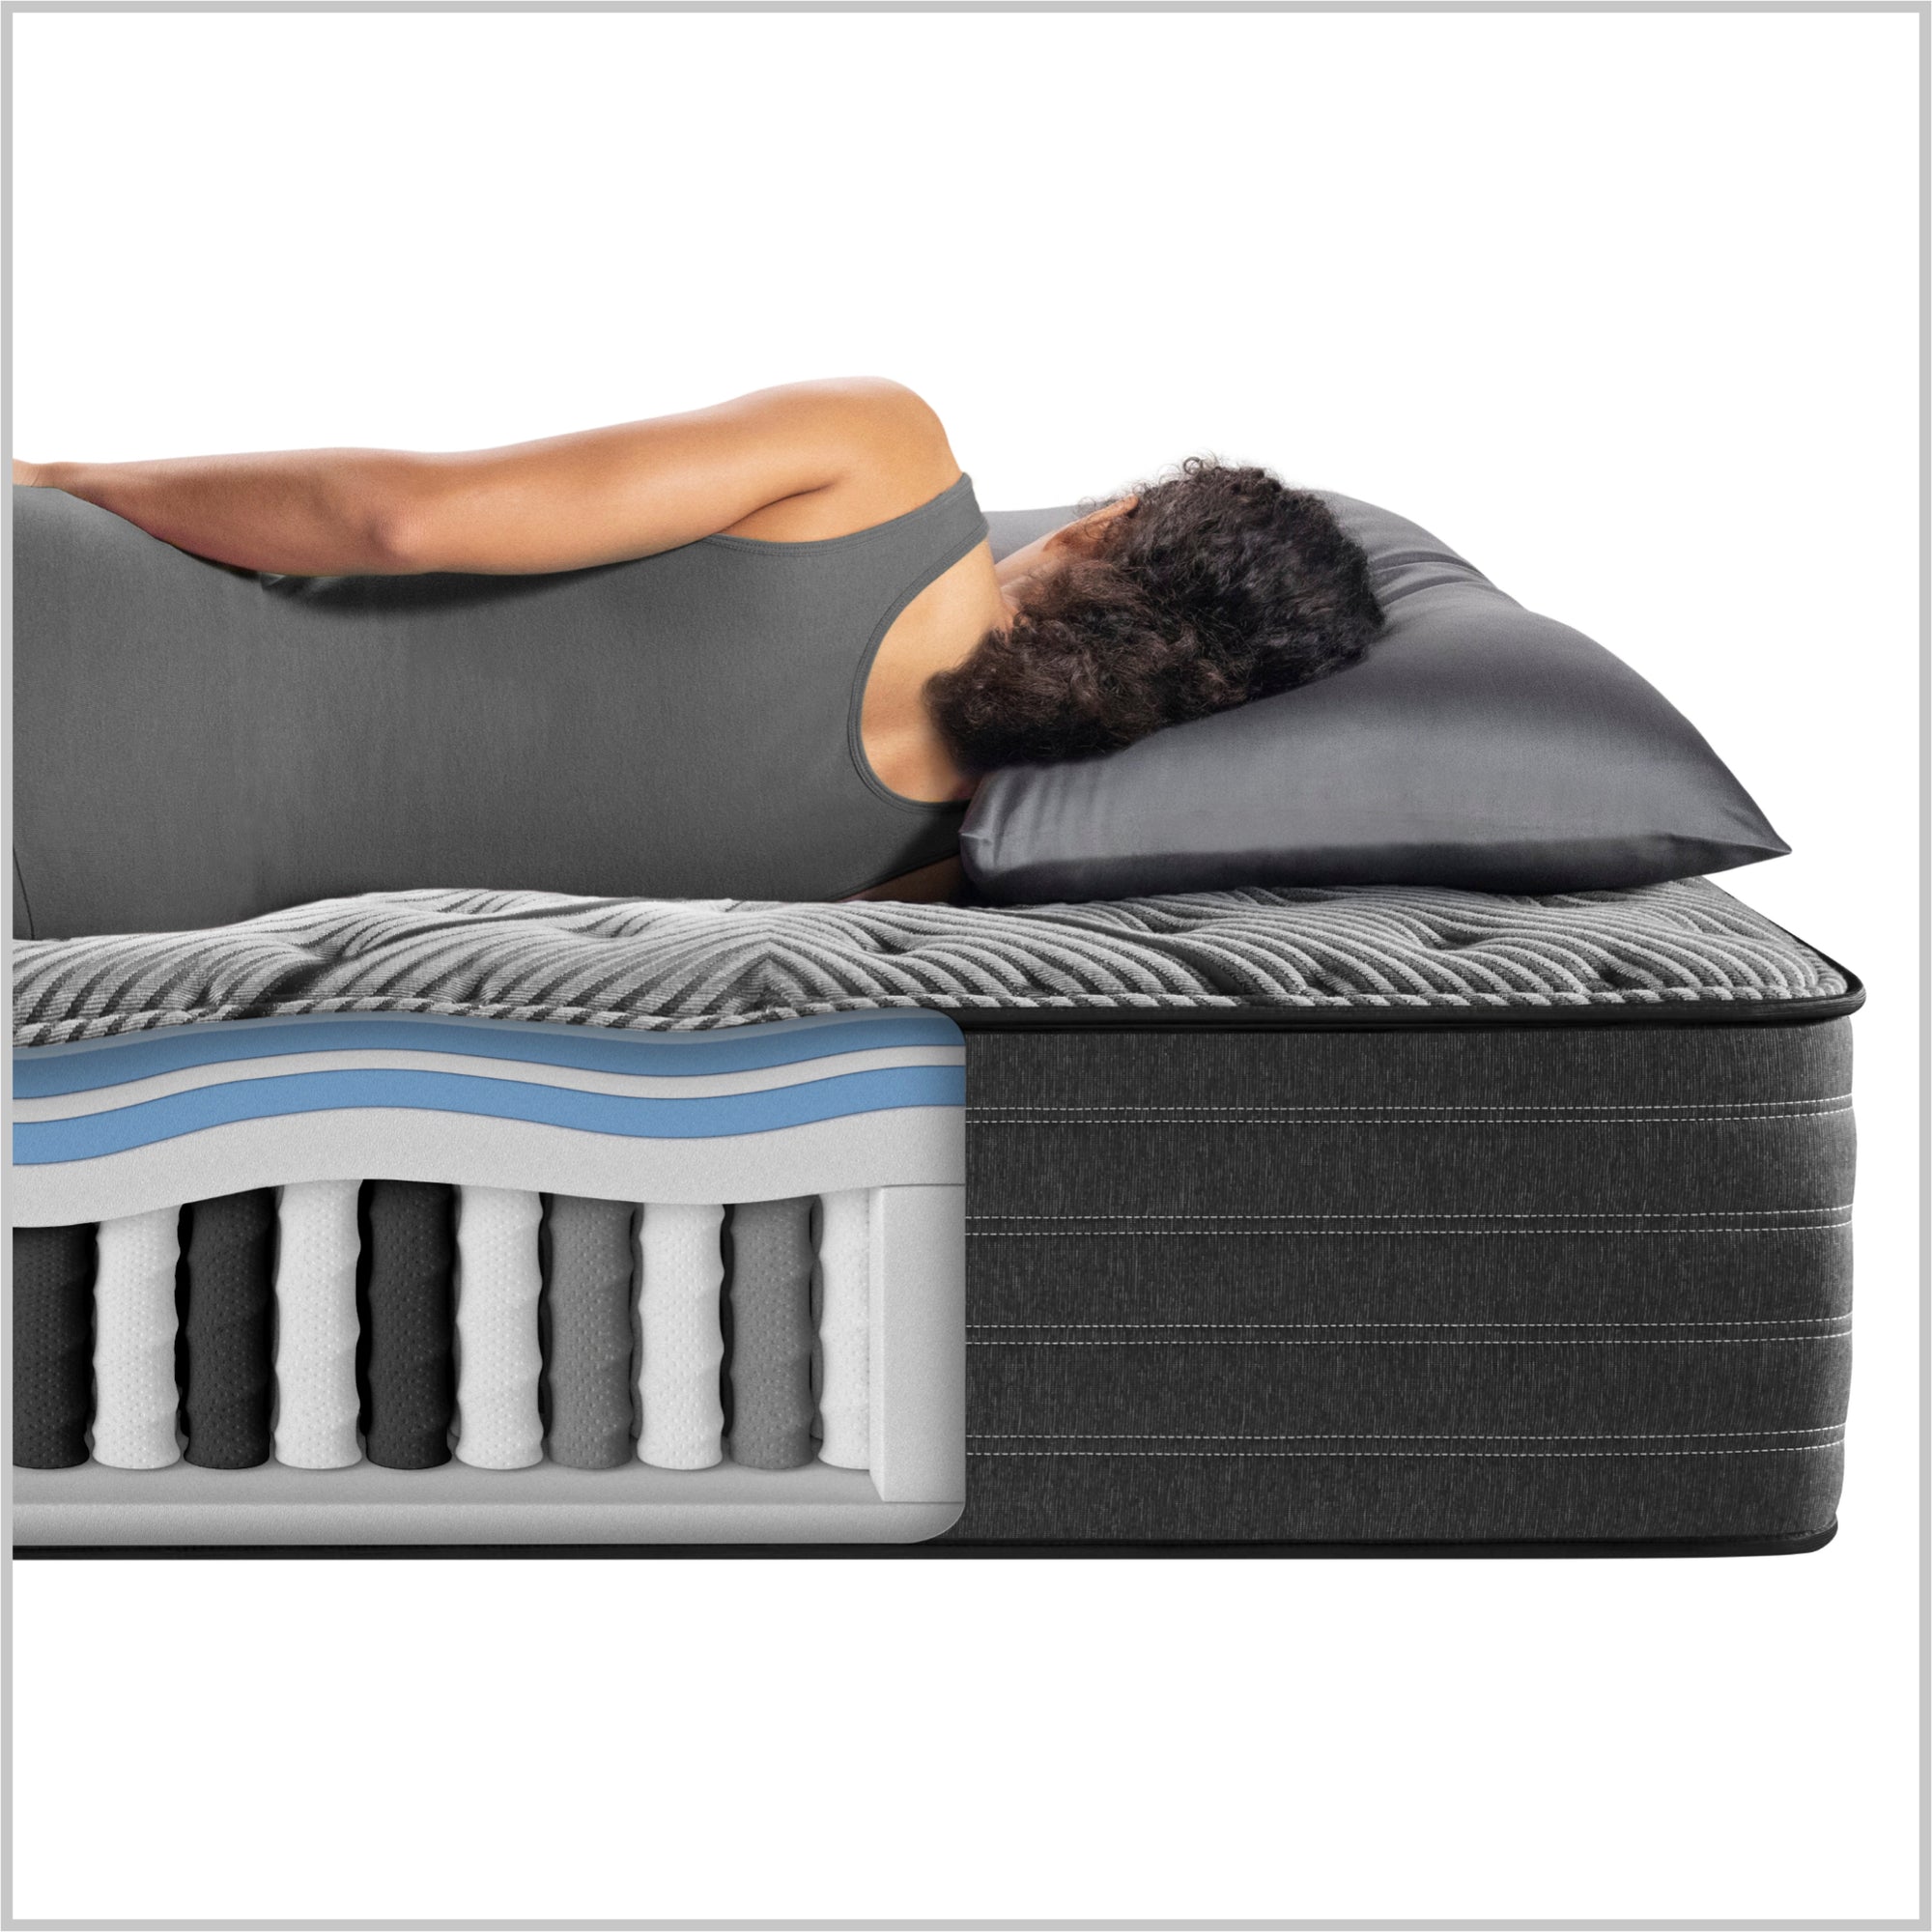 Diagram of the materials used in the Beautyrest Black l-class mattress||series: enhanced l-class|| feel: firm